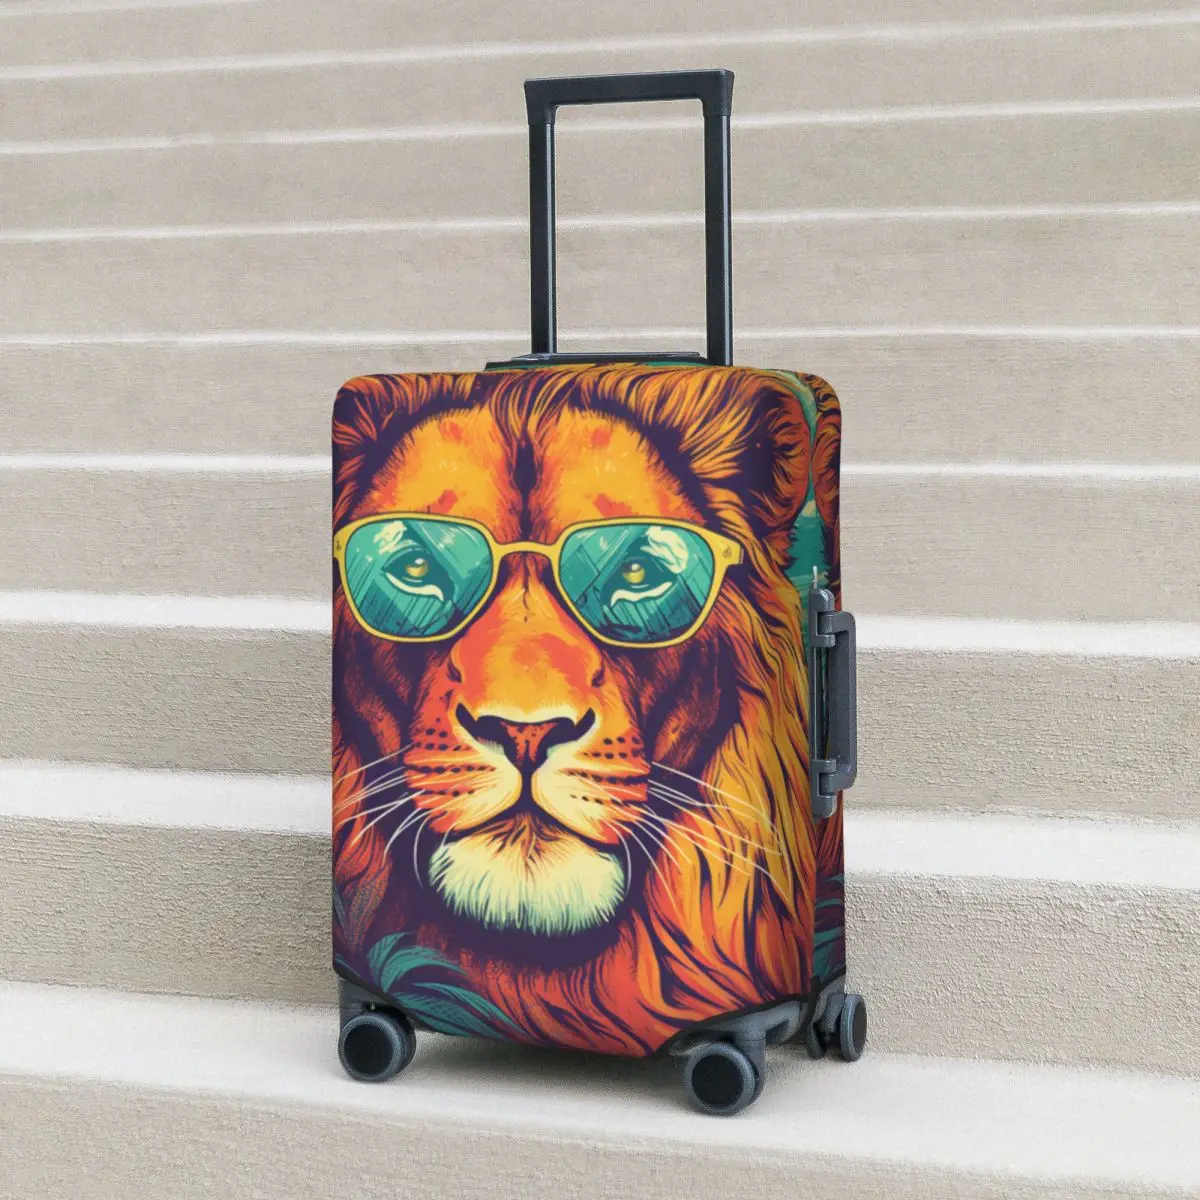 

Lion Suitcase Cover Flight Graphic Illustration Sunglasses Useful Luggage Supplies Travel Protection